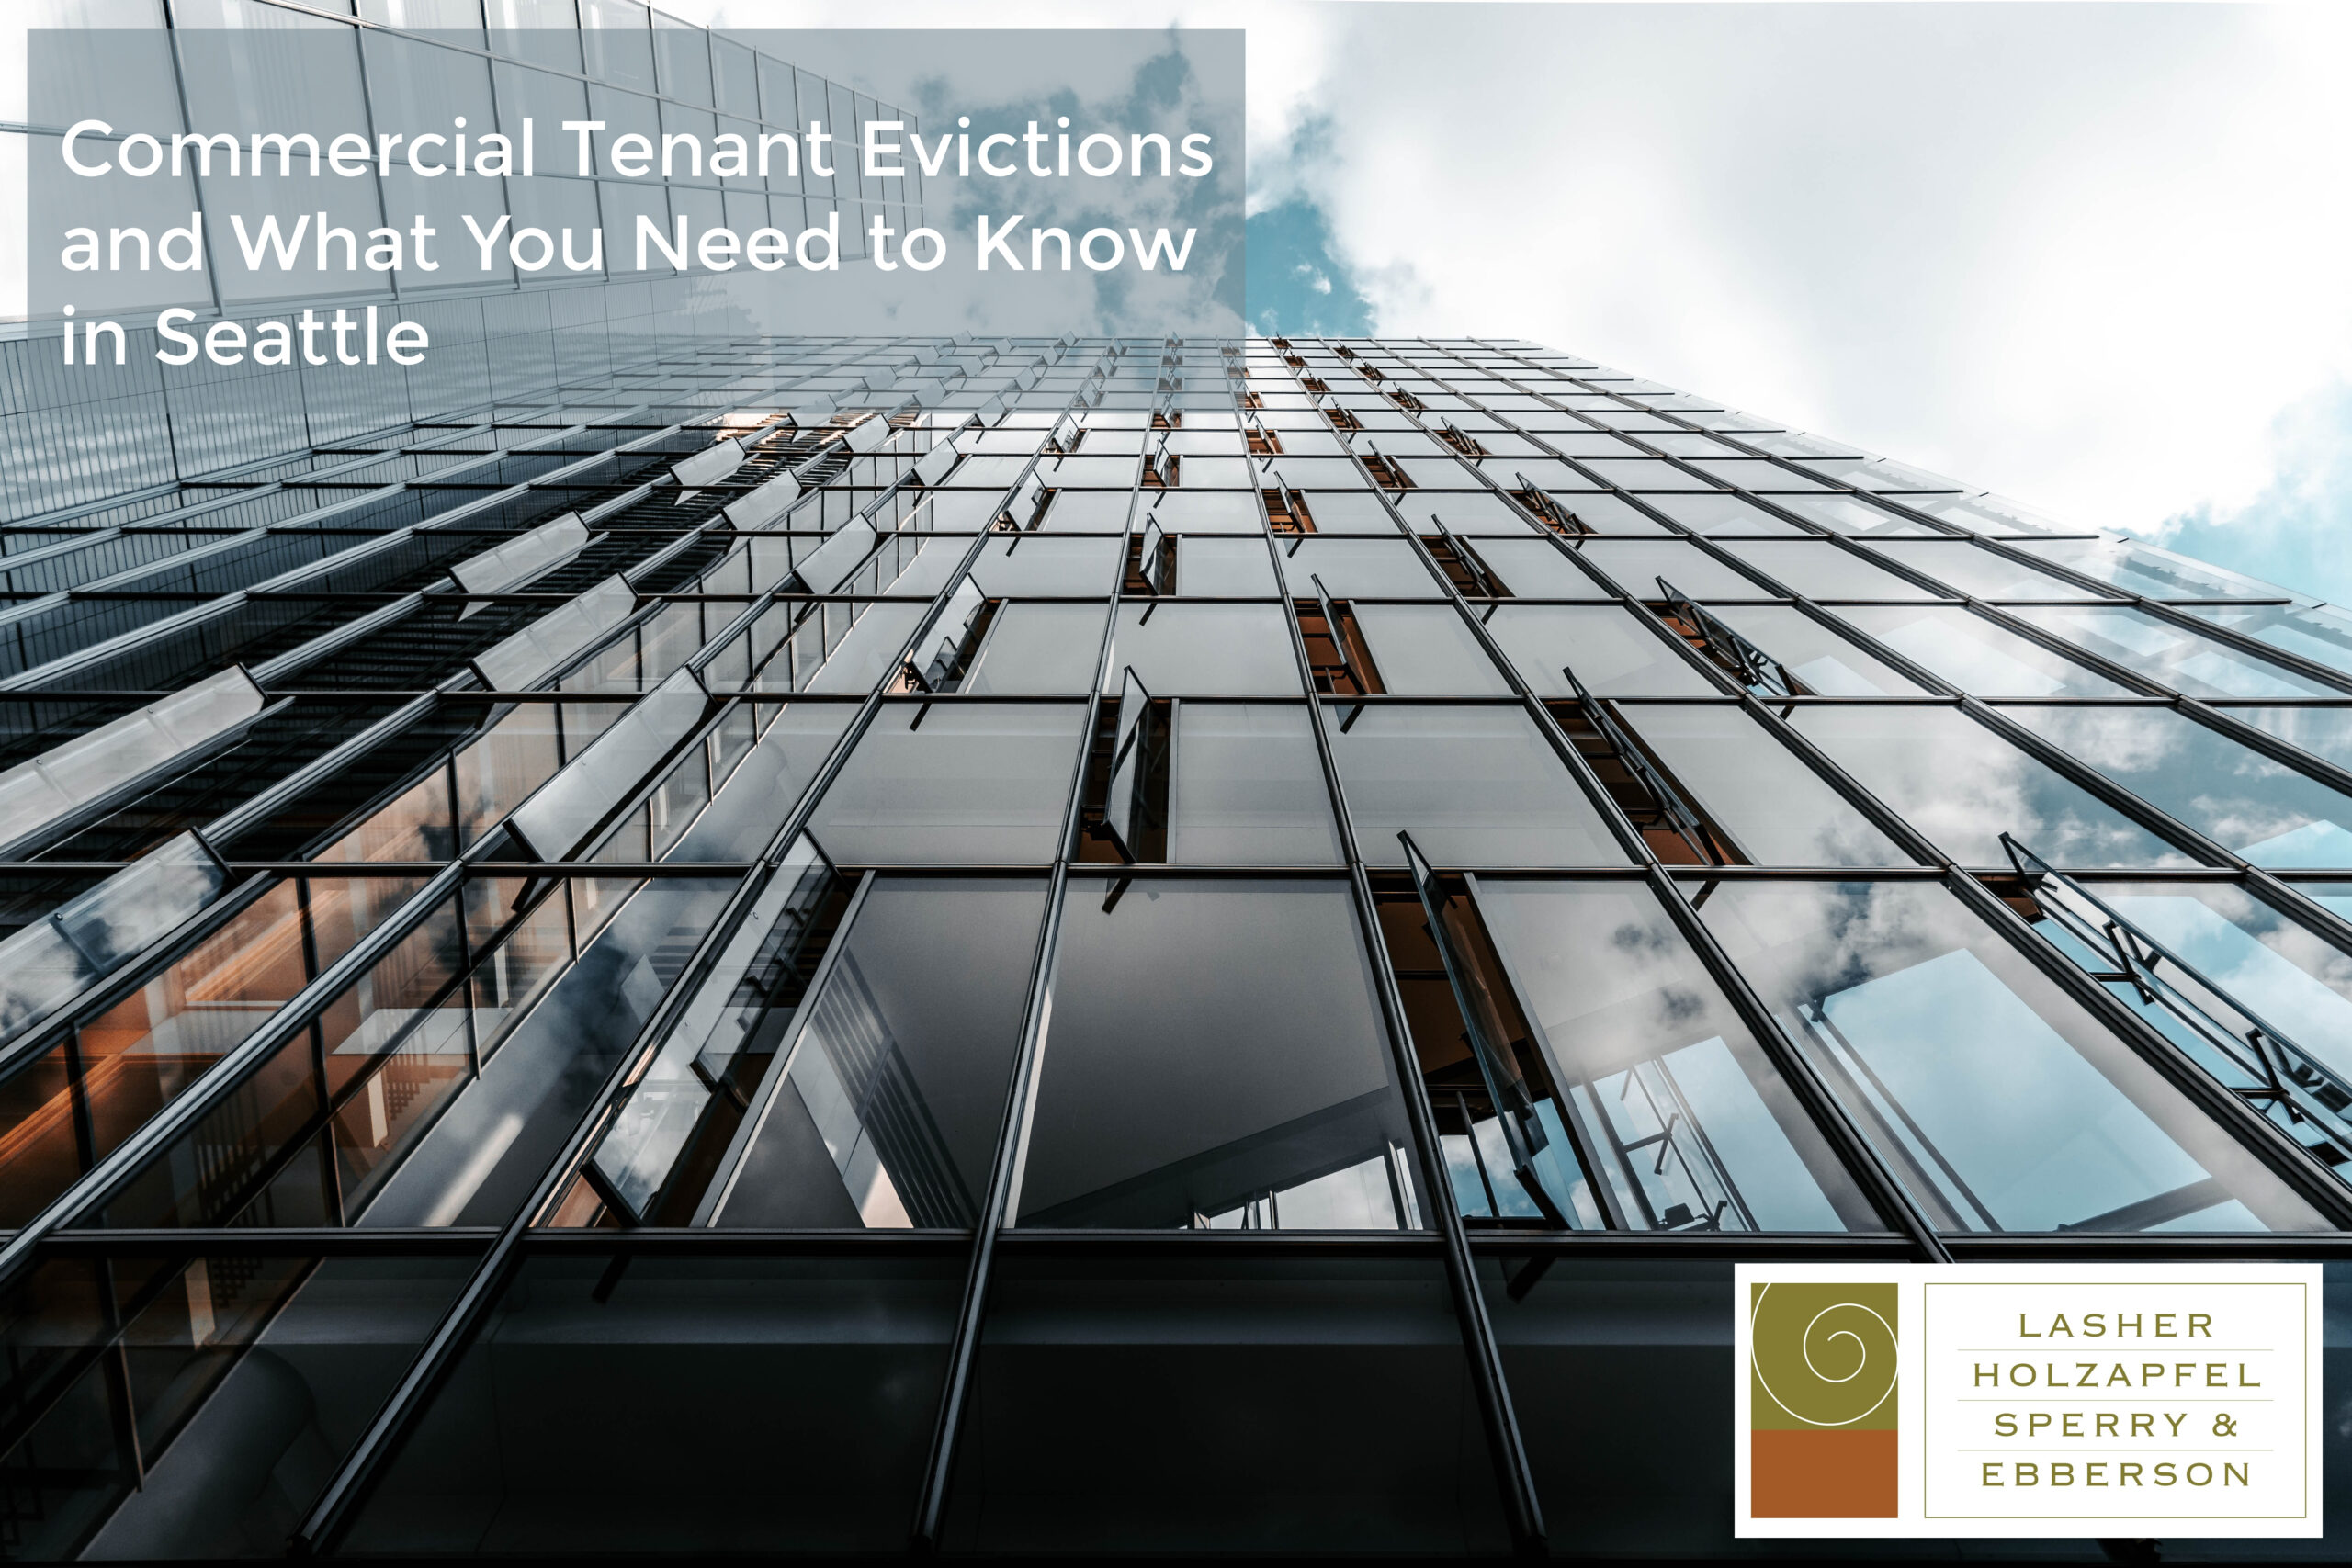 Commercial Tenant Evictions and What You Need to Know in Seattle